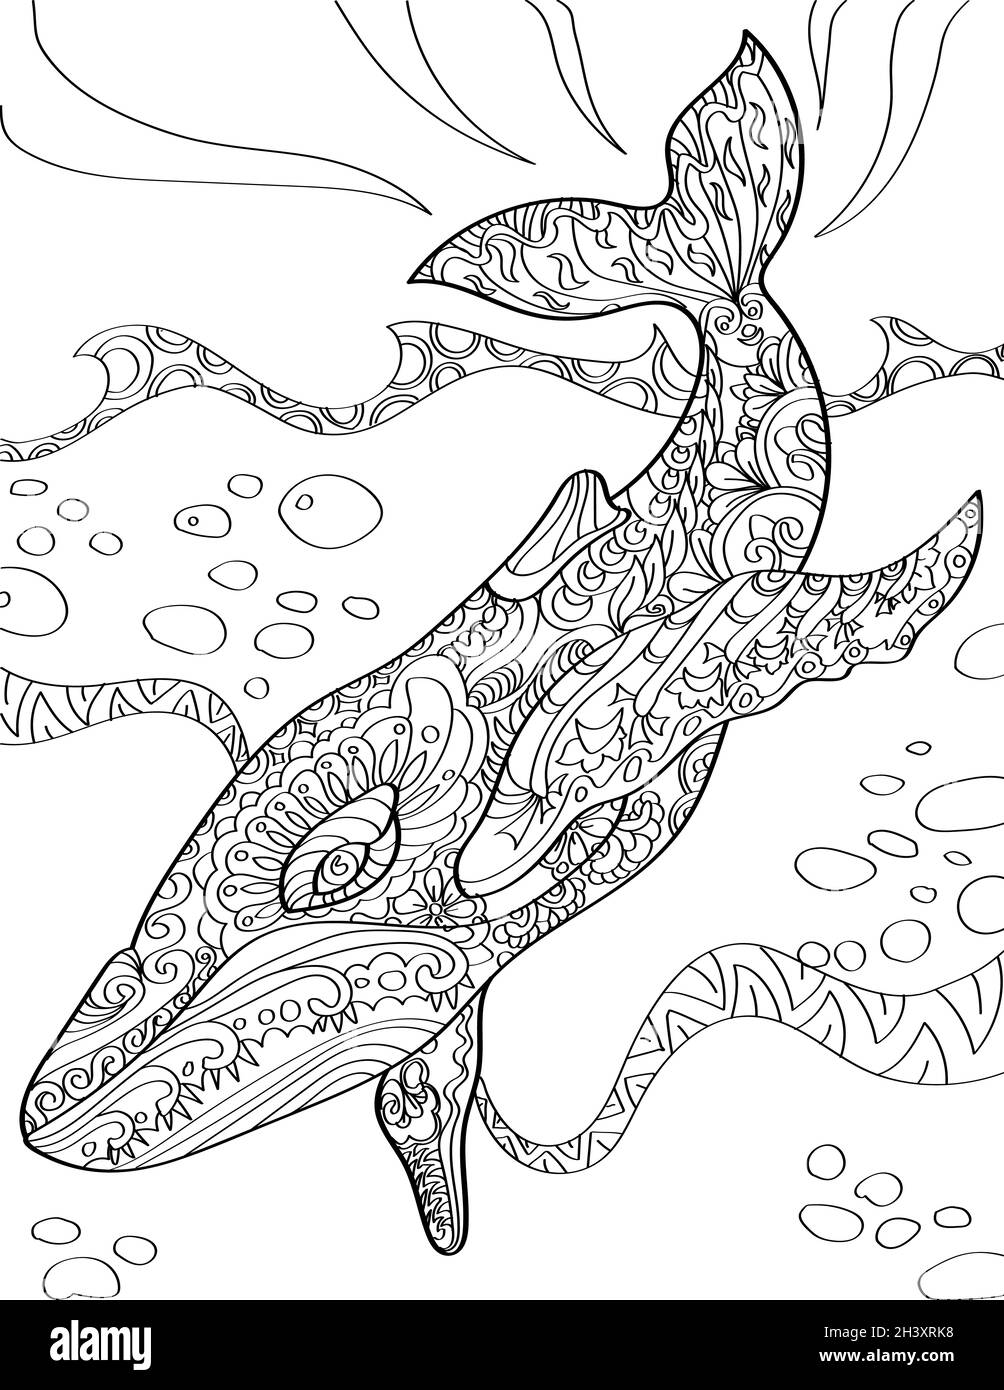 Large Whale Diving Deep Into The Sea Colorless Line Drawing. Huge Aquatic Creature Dives Below Ocean With Big Waves Coloring Boo Stock Photo